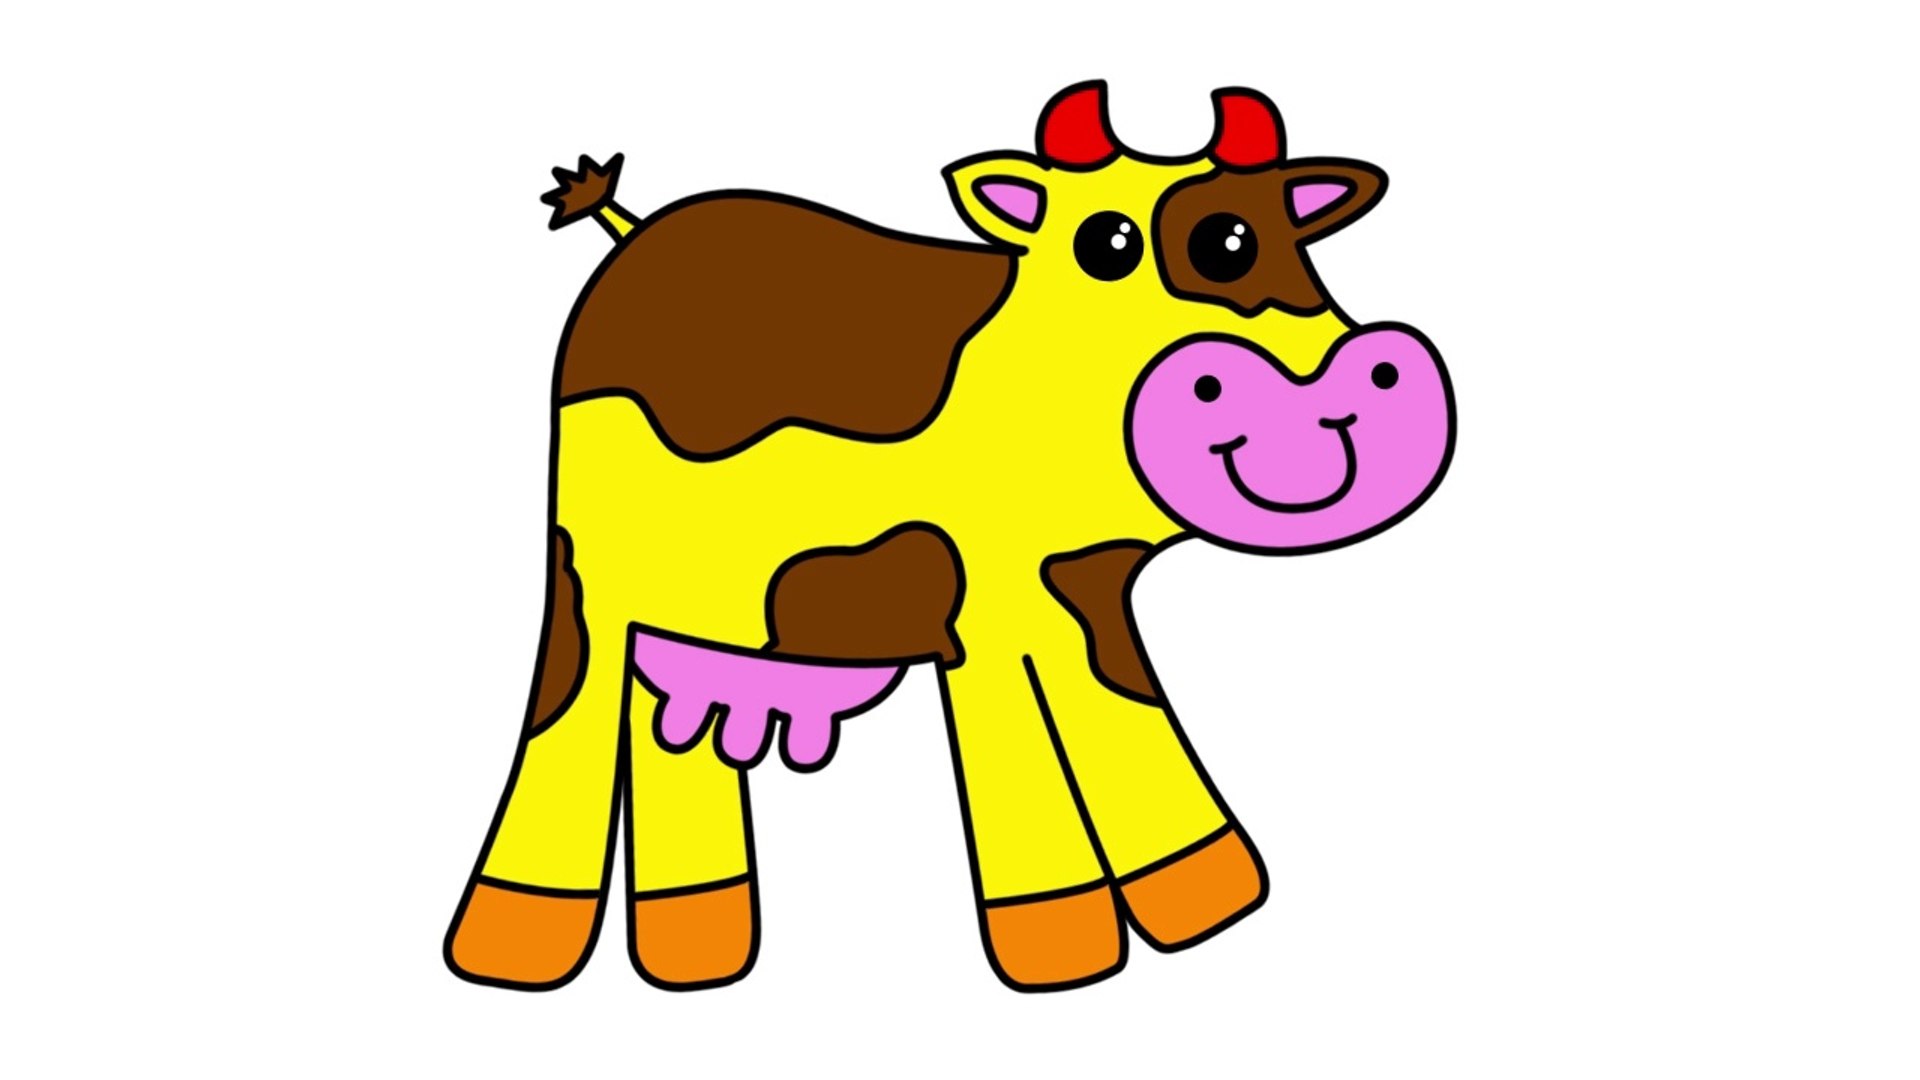 Coloring A Cow Cute Farm Animals Coloring Page | Drawing and coloring for  kids - video Dailymotion